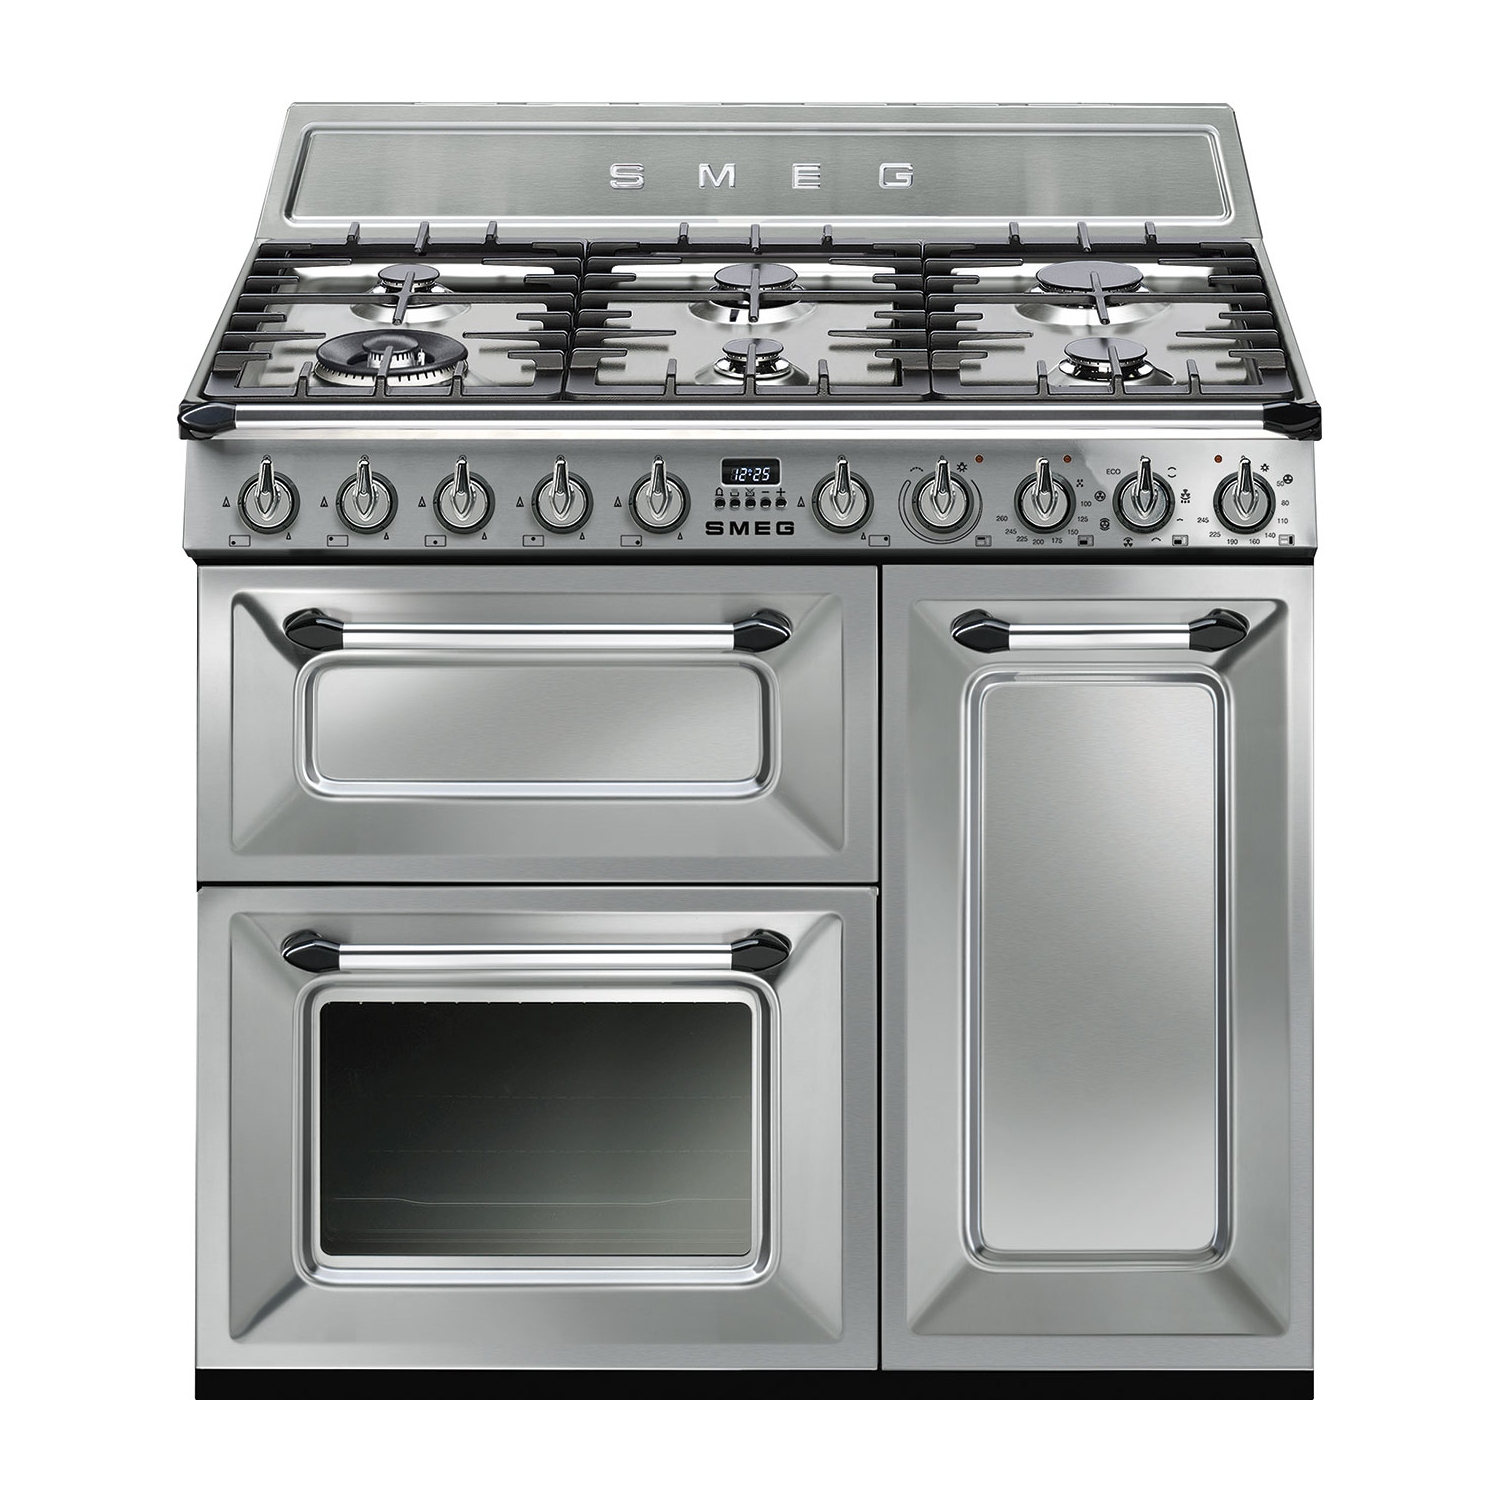 Smeg 90cm Victoria Dual Fuel Range Cooker - Stainless Steel - A Rated - 0